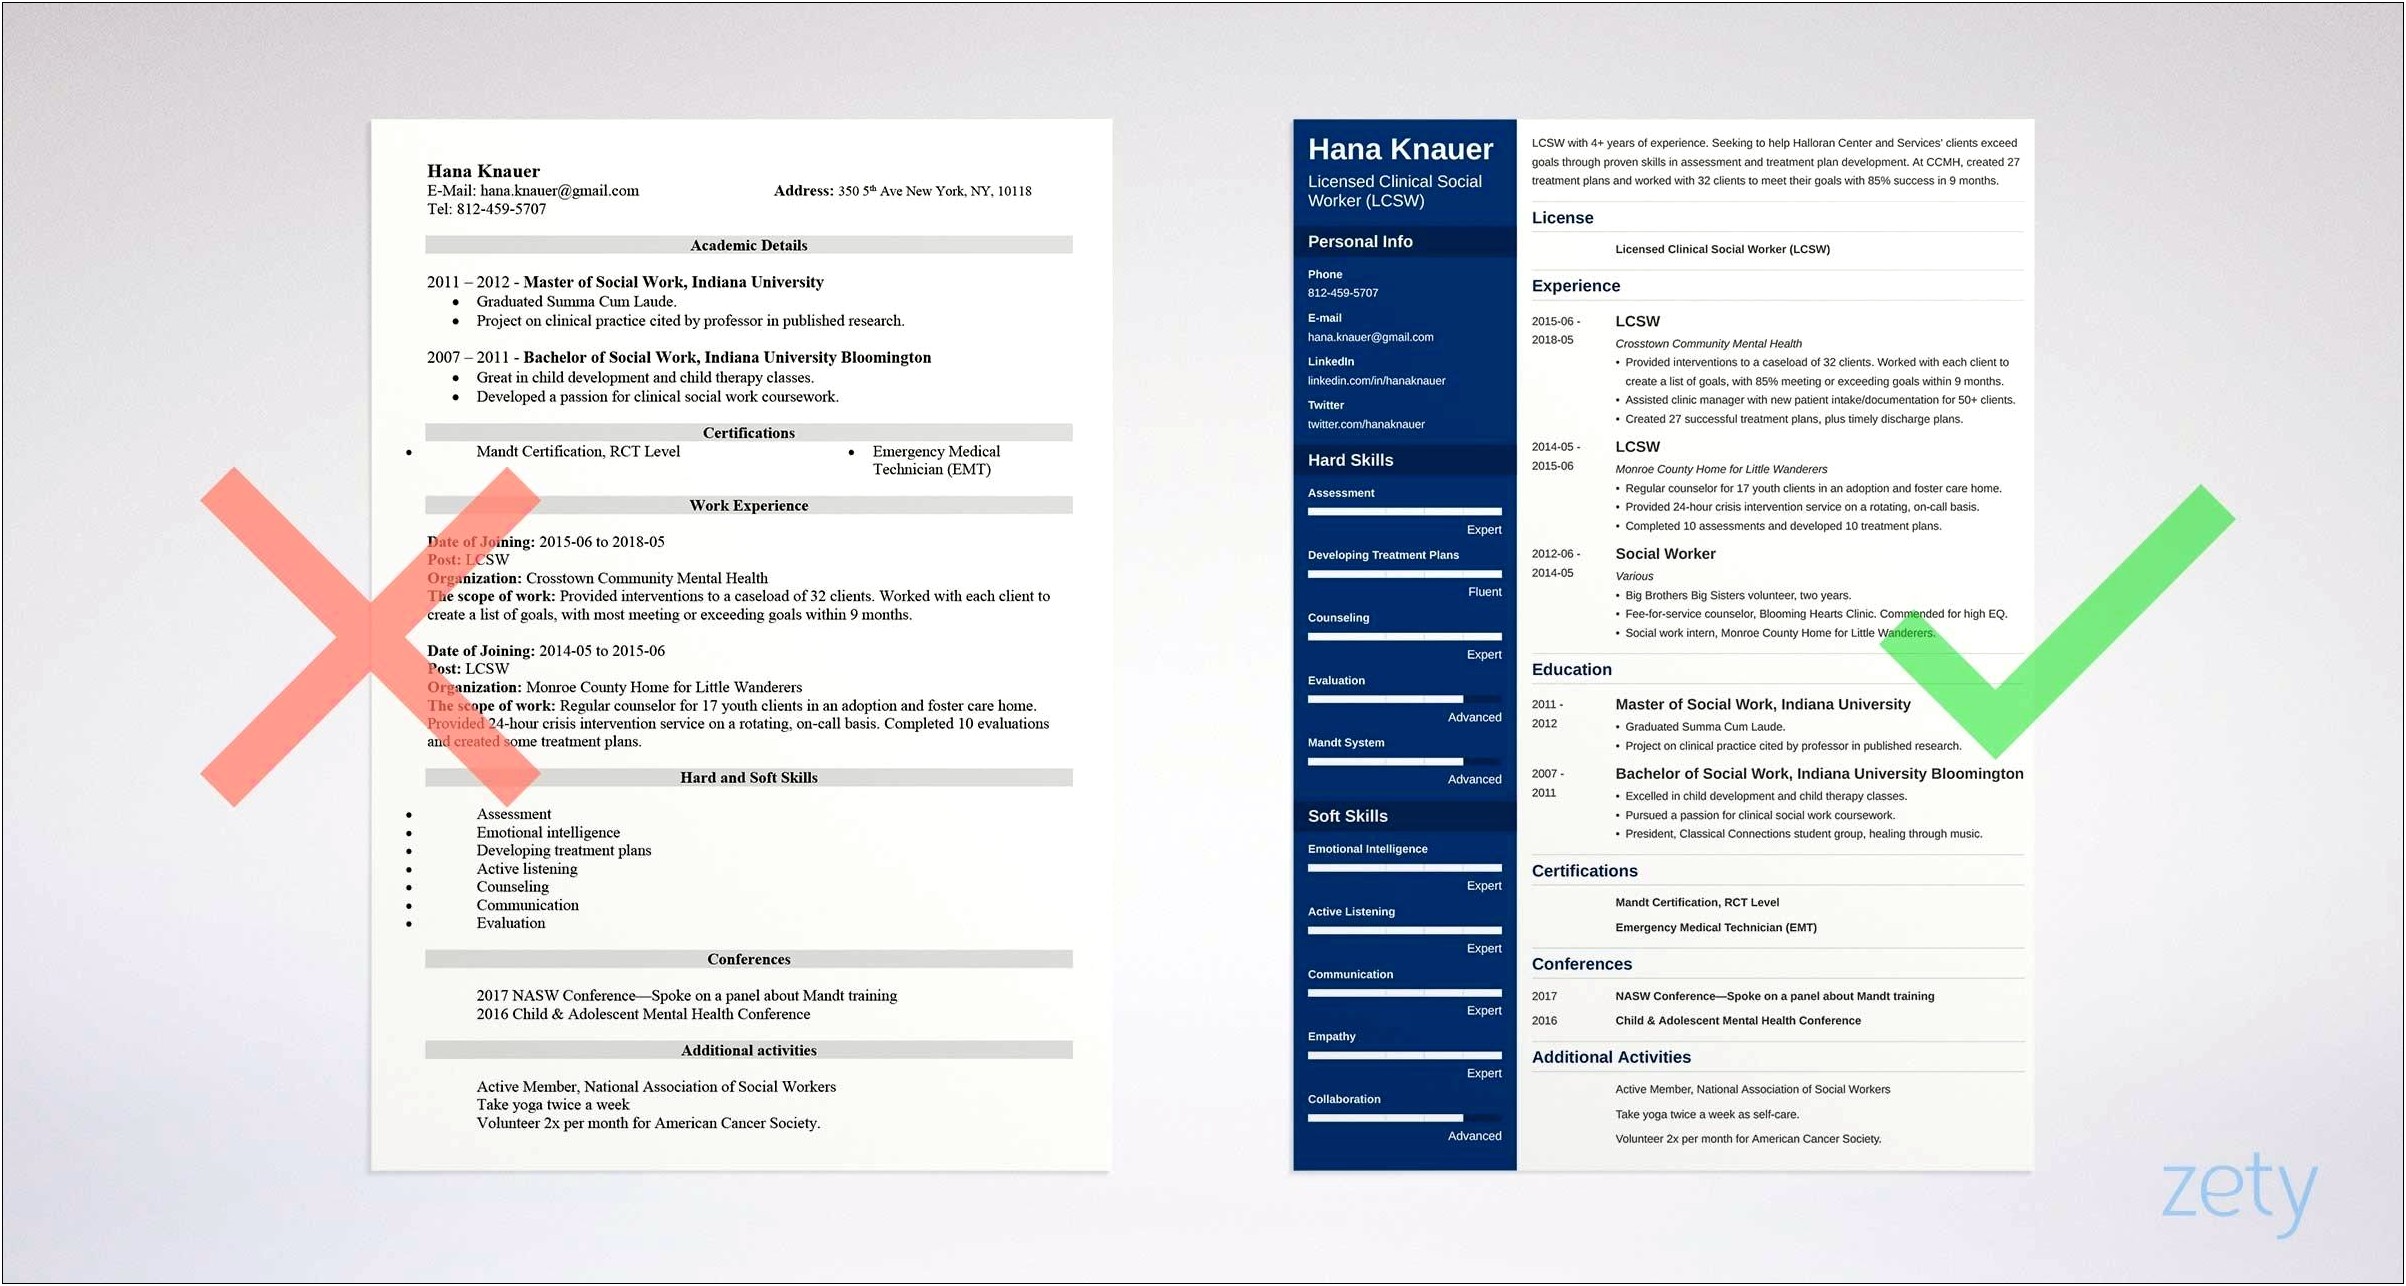 Simple Resume Format For Social Worker